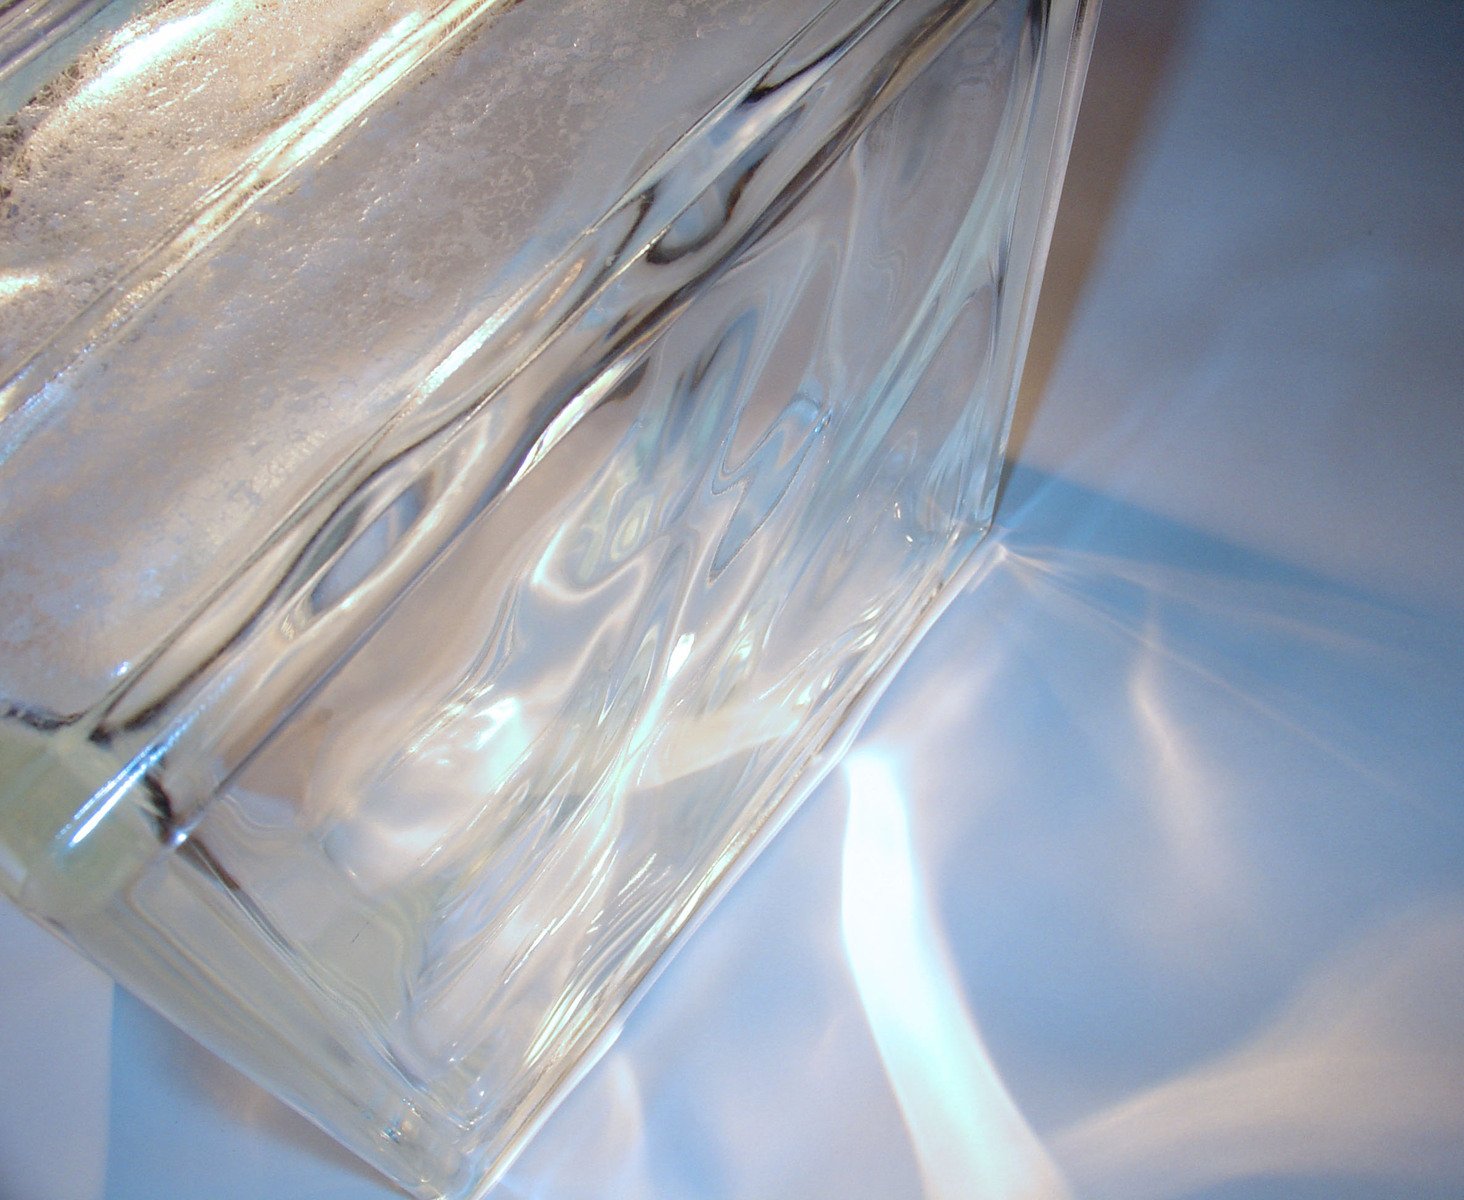 a glass vase is on a shiny white surface